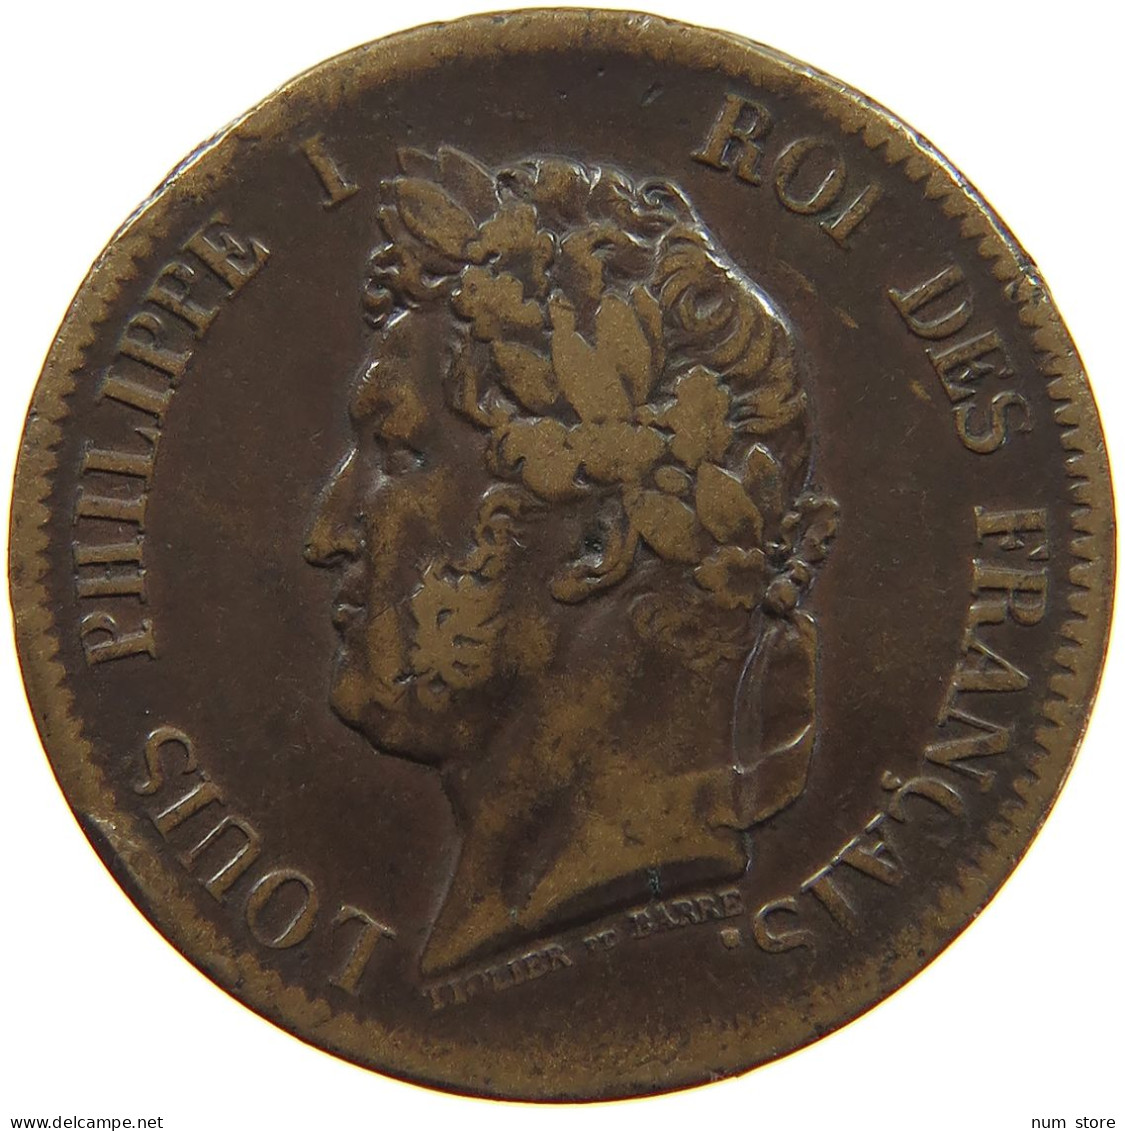 FRENCH COLONIES 5 CENTIMES 1843 A LOUIS PHILIPPE I. (1830-1848) #c061 0071 - Franse Koloniën (1817-1844)